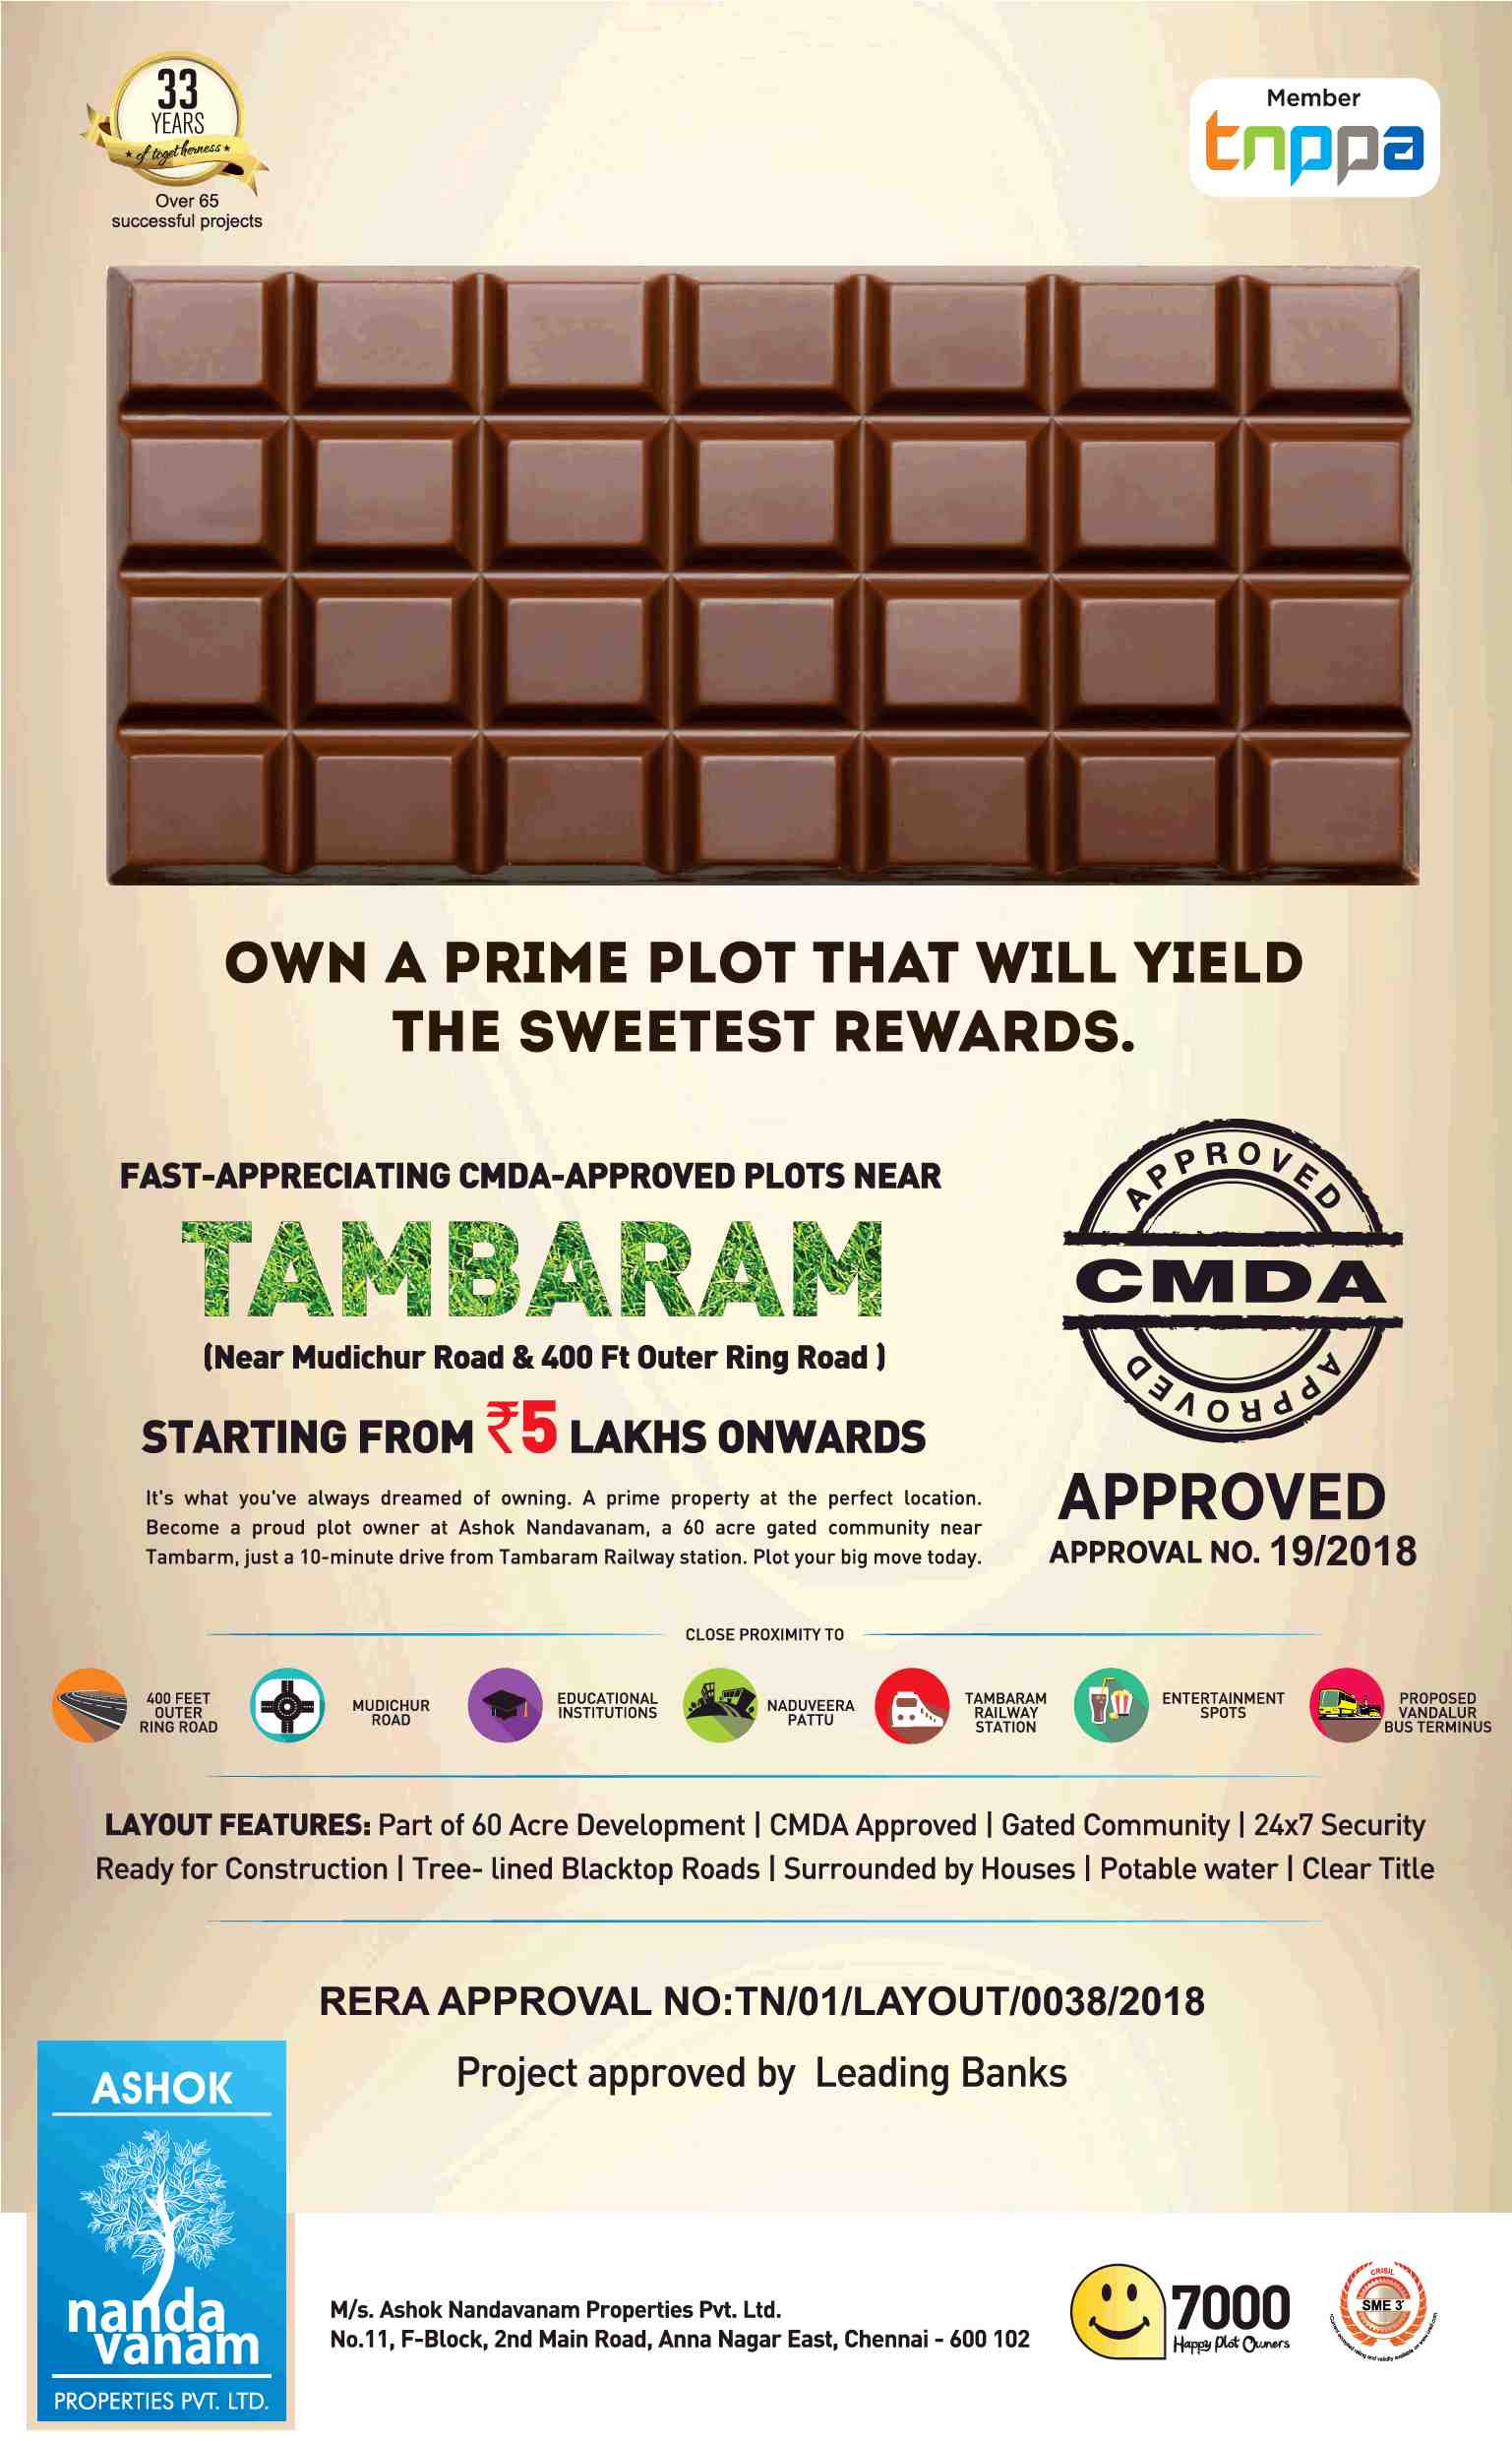 Own a prime plot that will yield the sweetest rewards at Ashok Nandavanam Limited Edition in Chennai